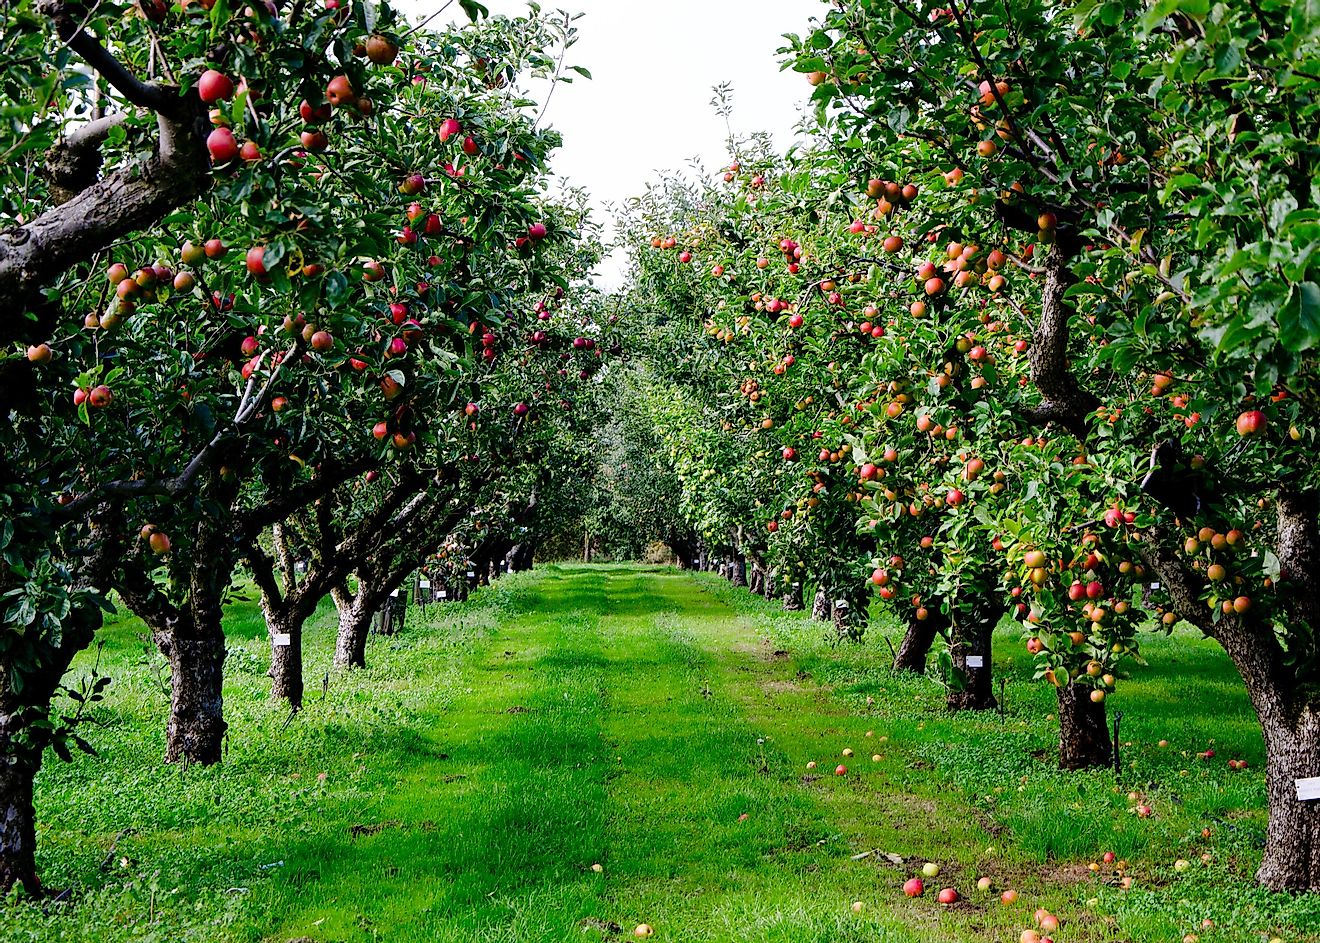 Rows of apple trees. 